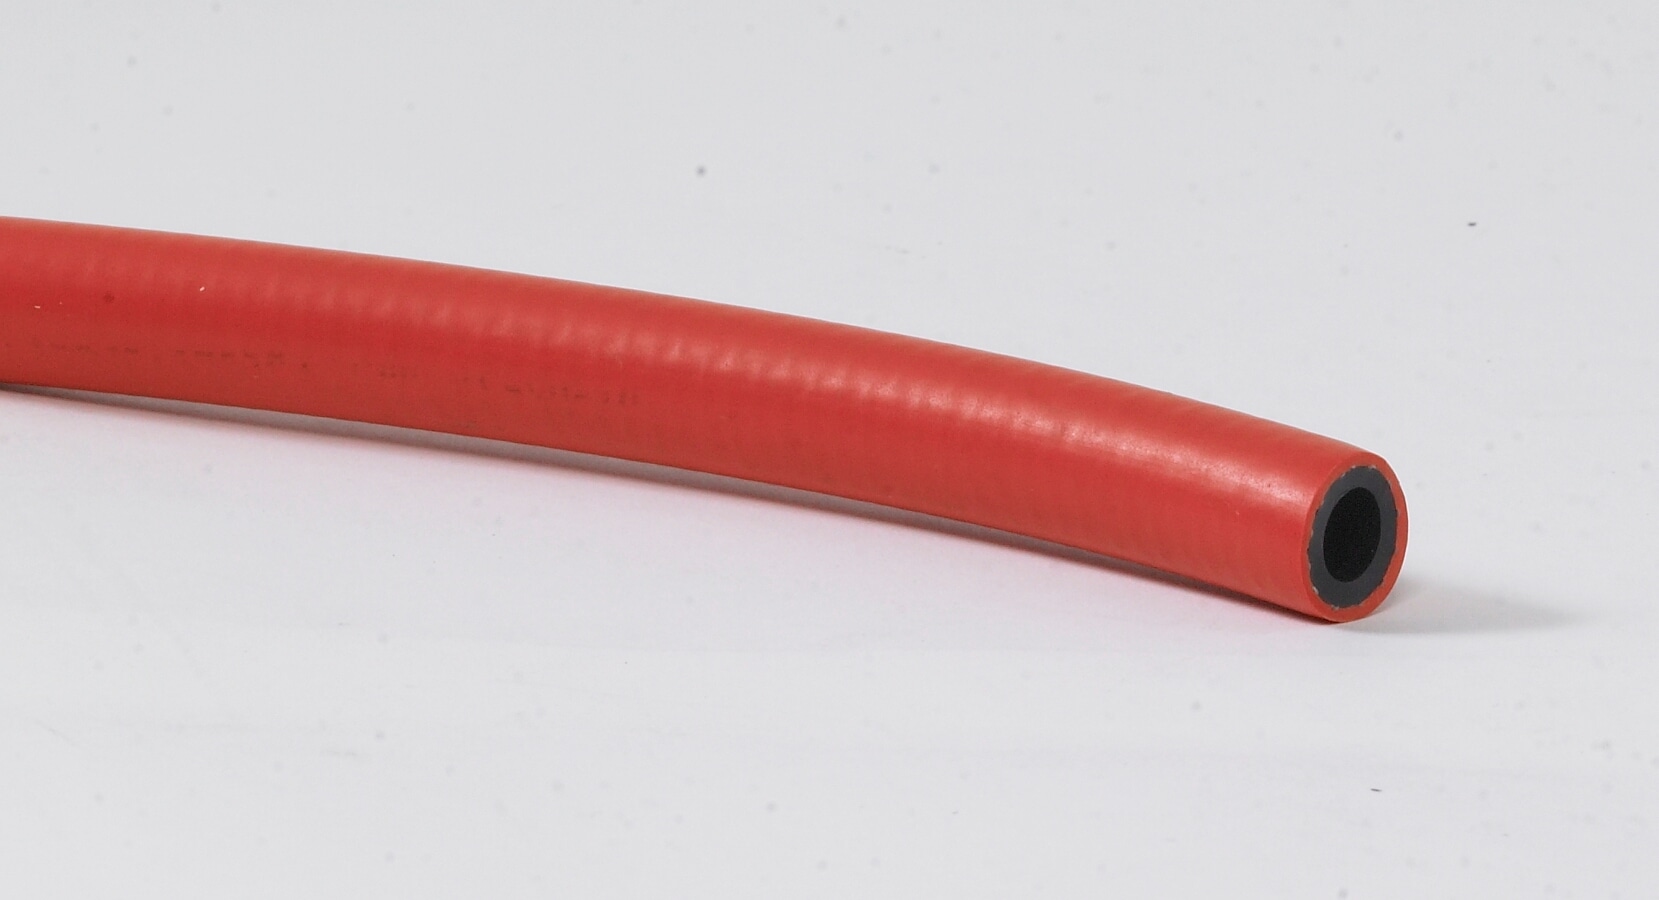 Watts 3/8-in ID x 1-ft Reinforced PVC Red Reinforced Air Hose in